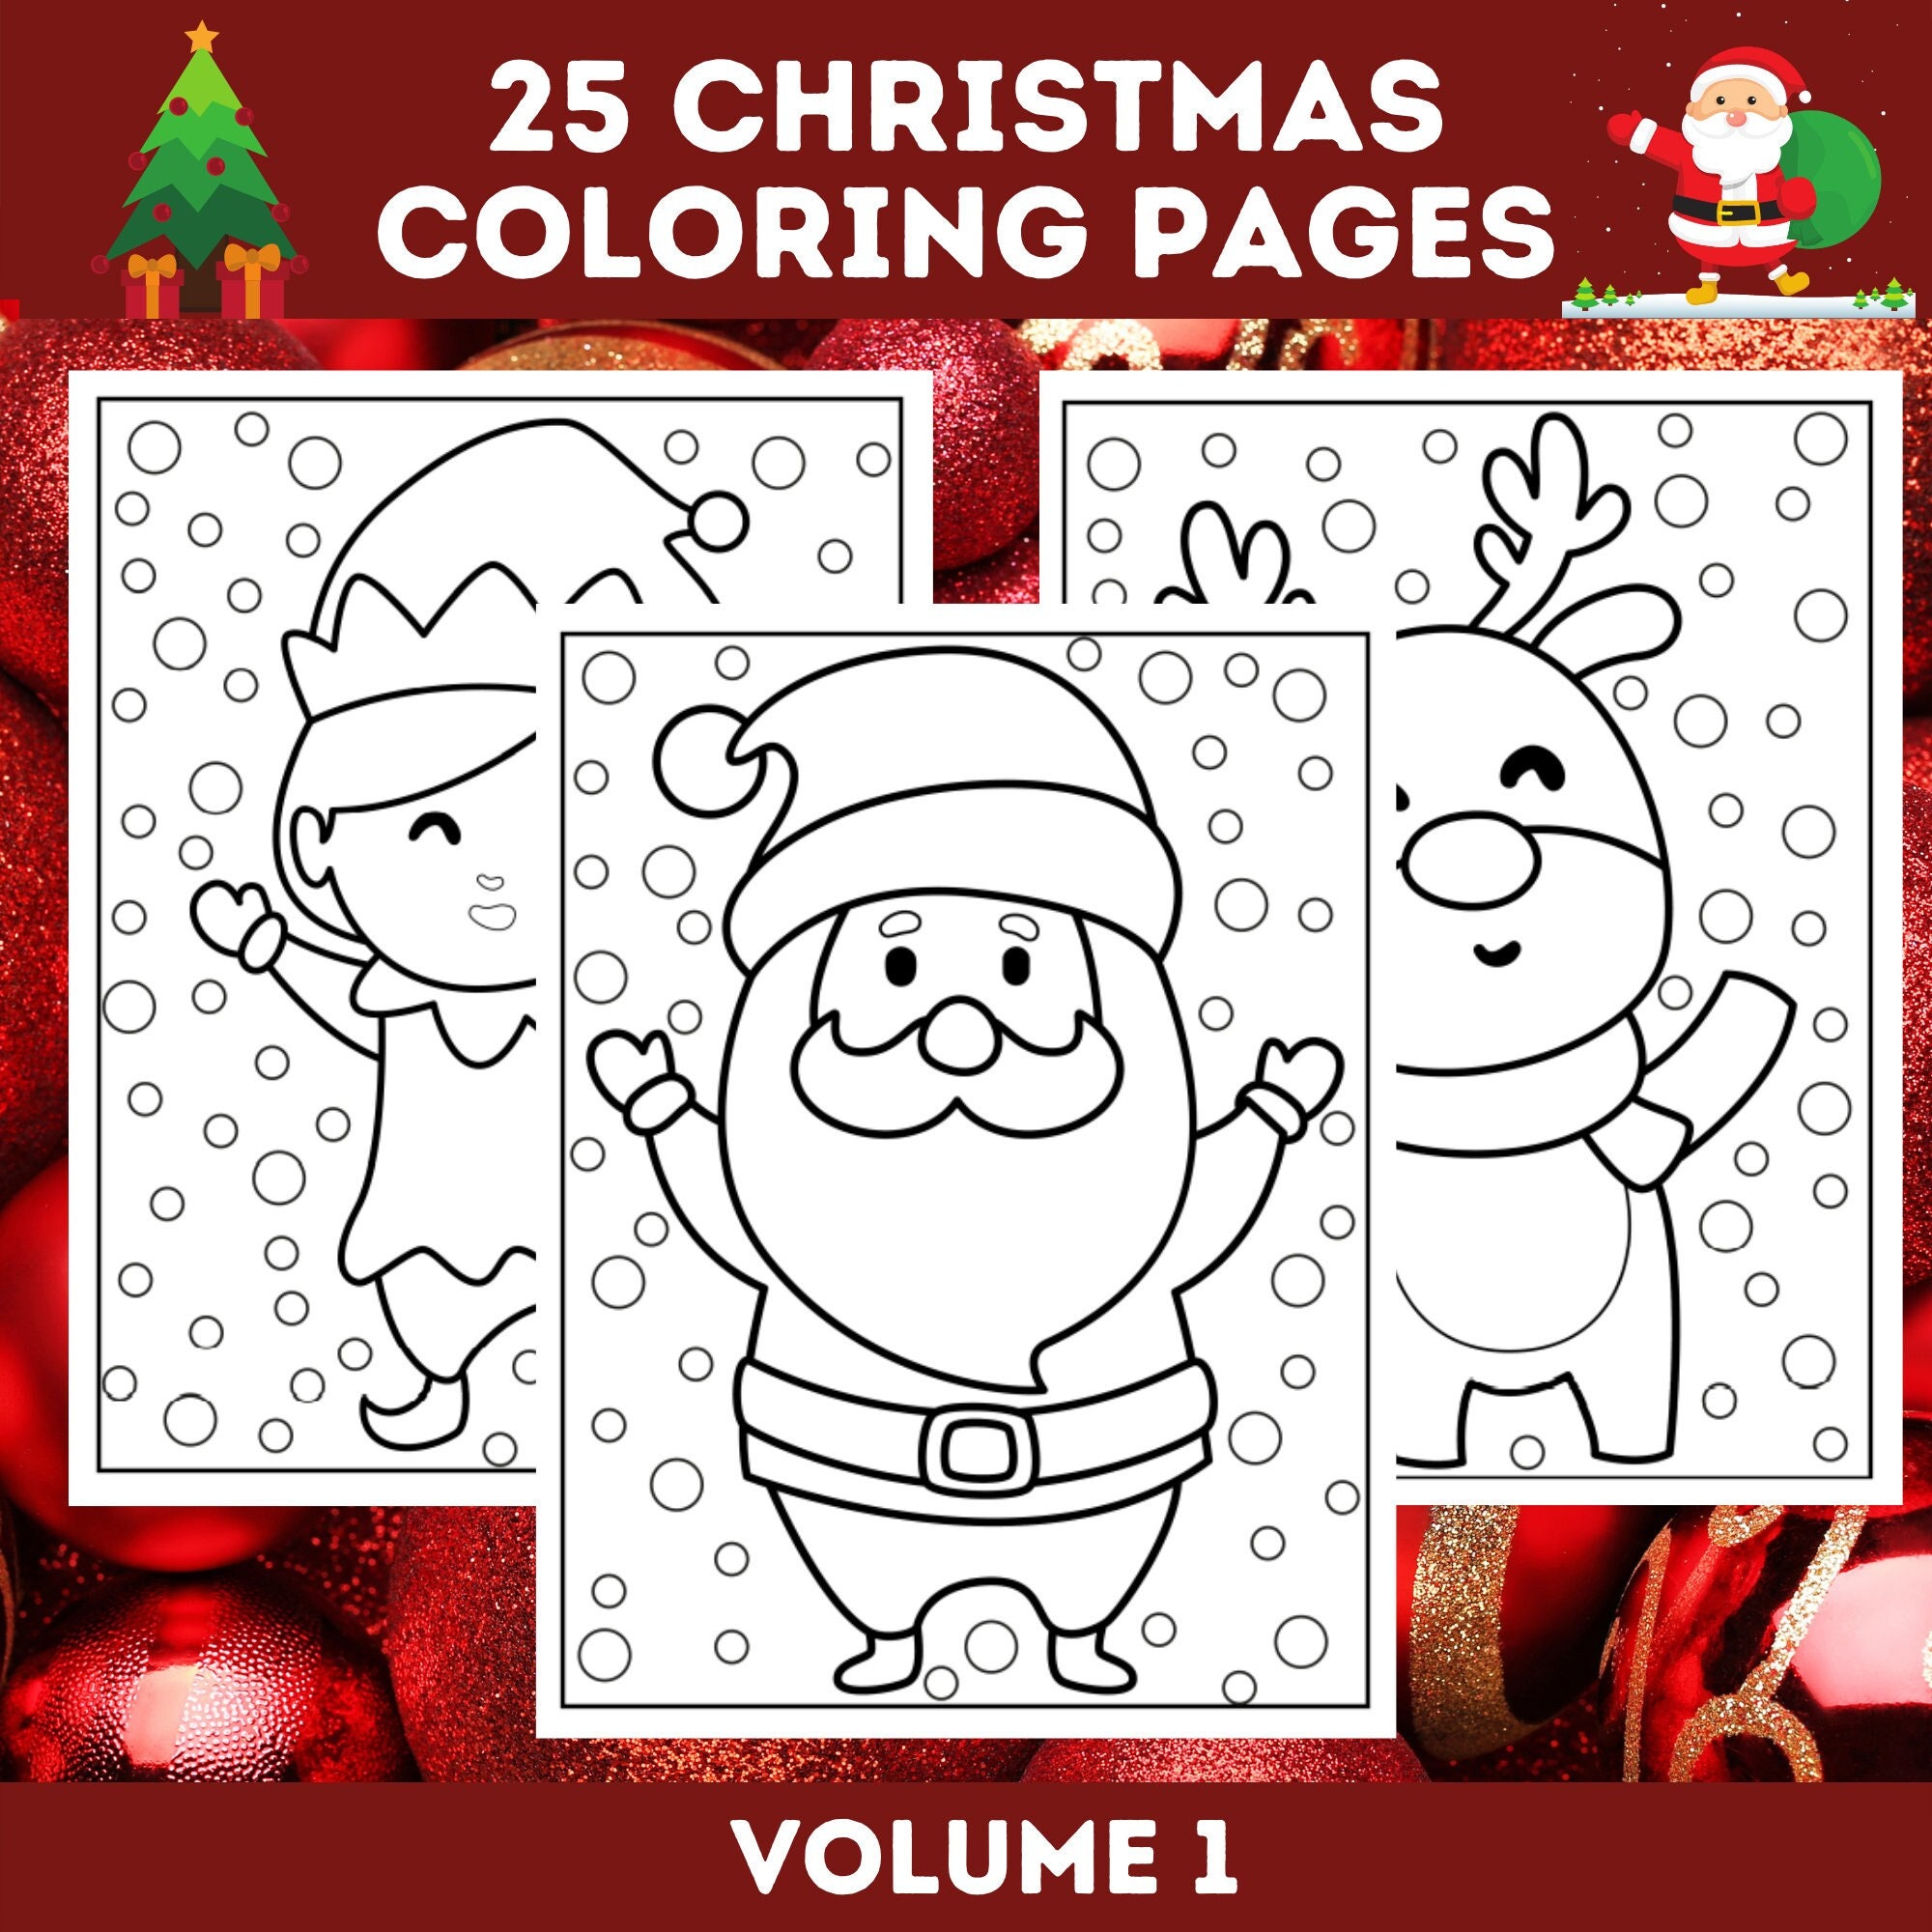 Christmas Coloring Book for Kids: Fun Children's Christmas Gift or